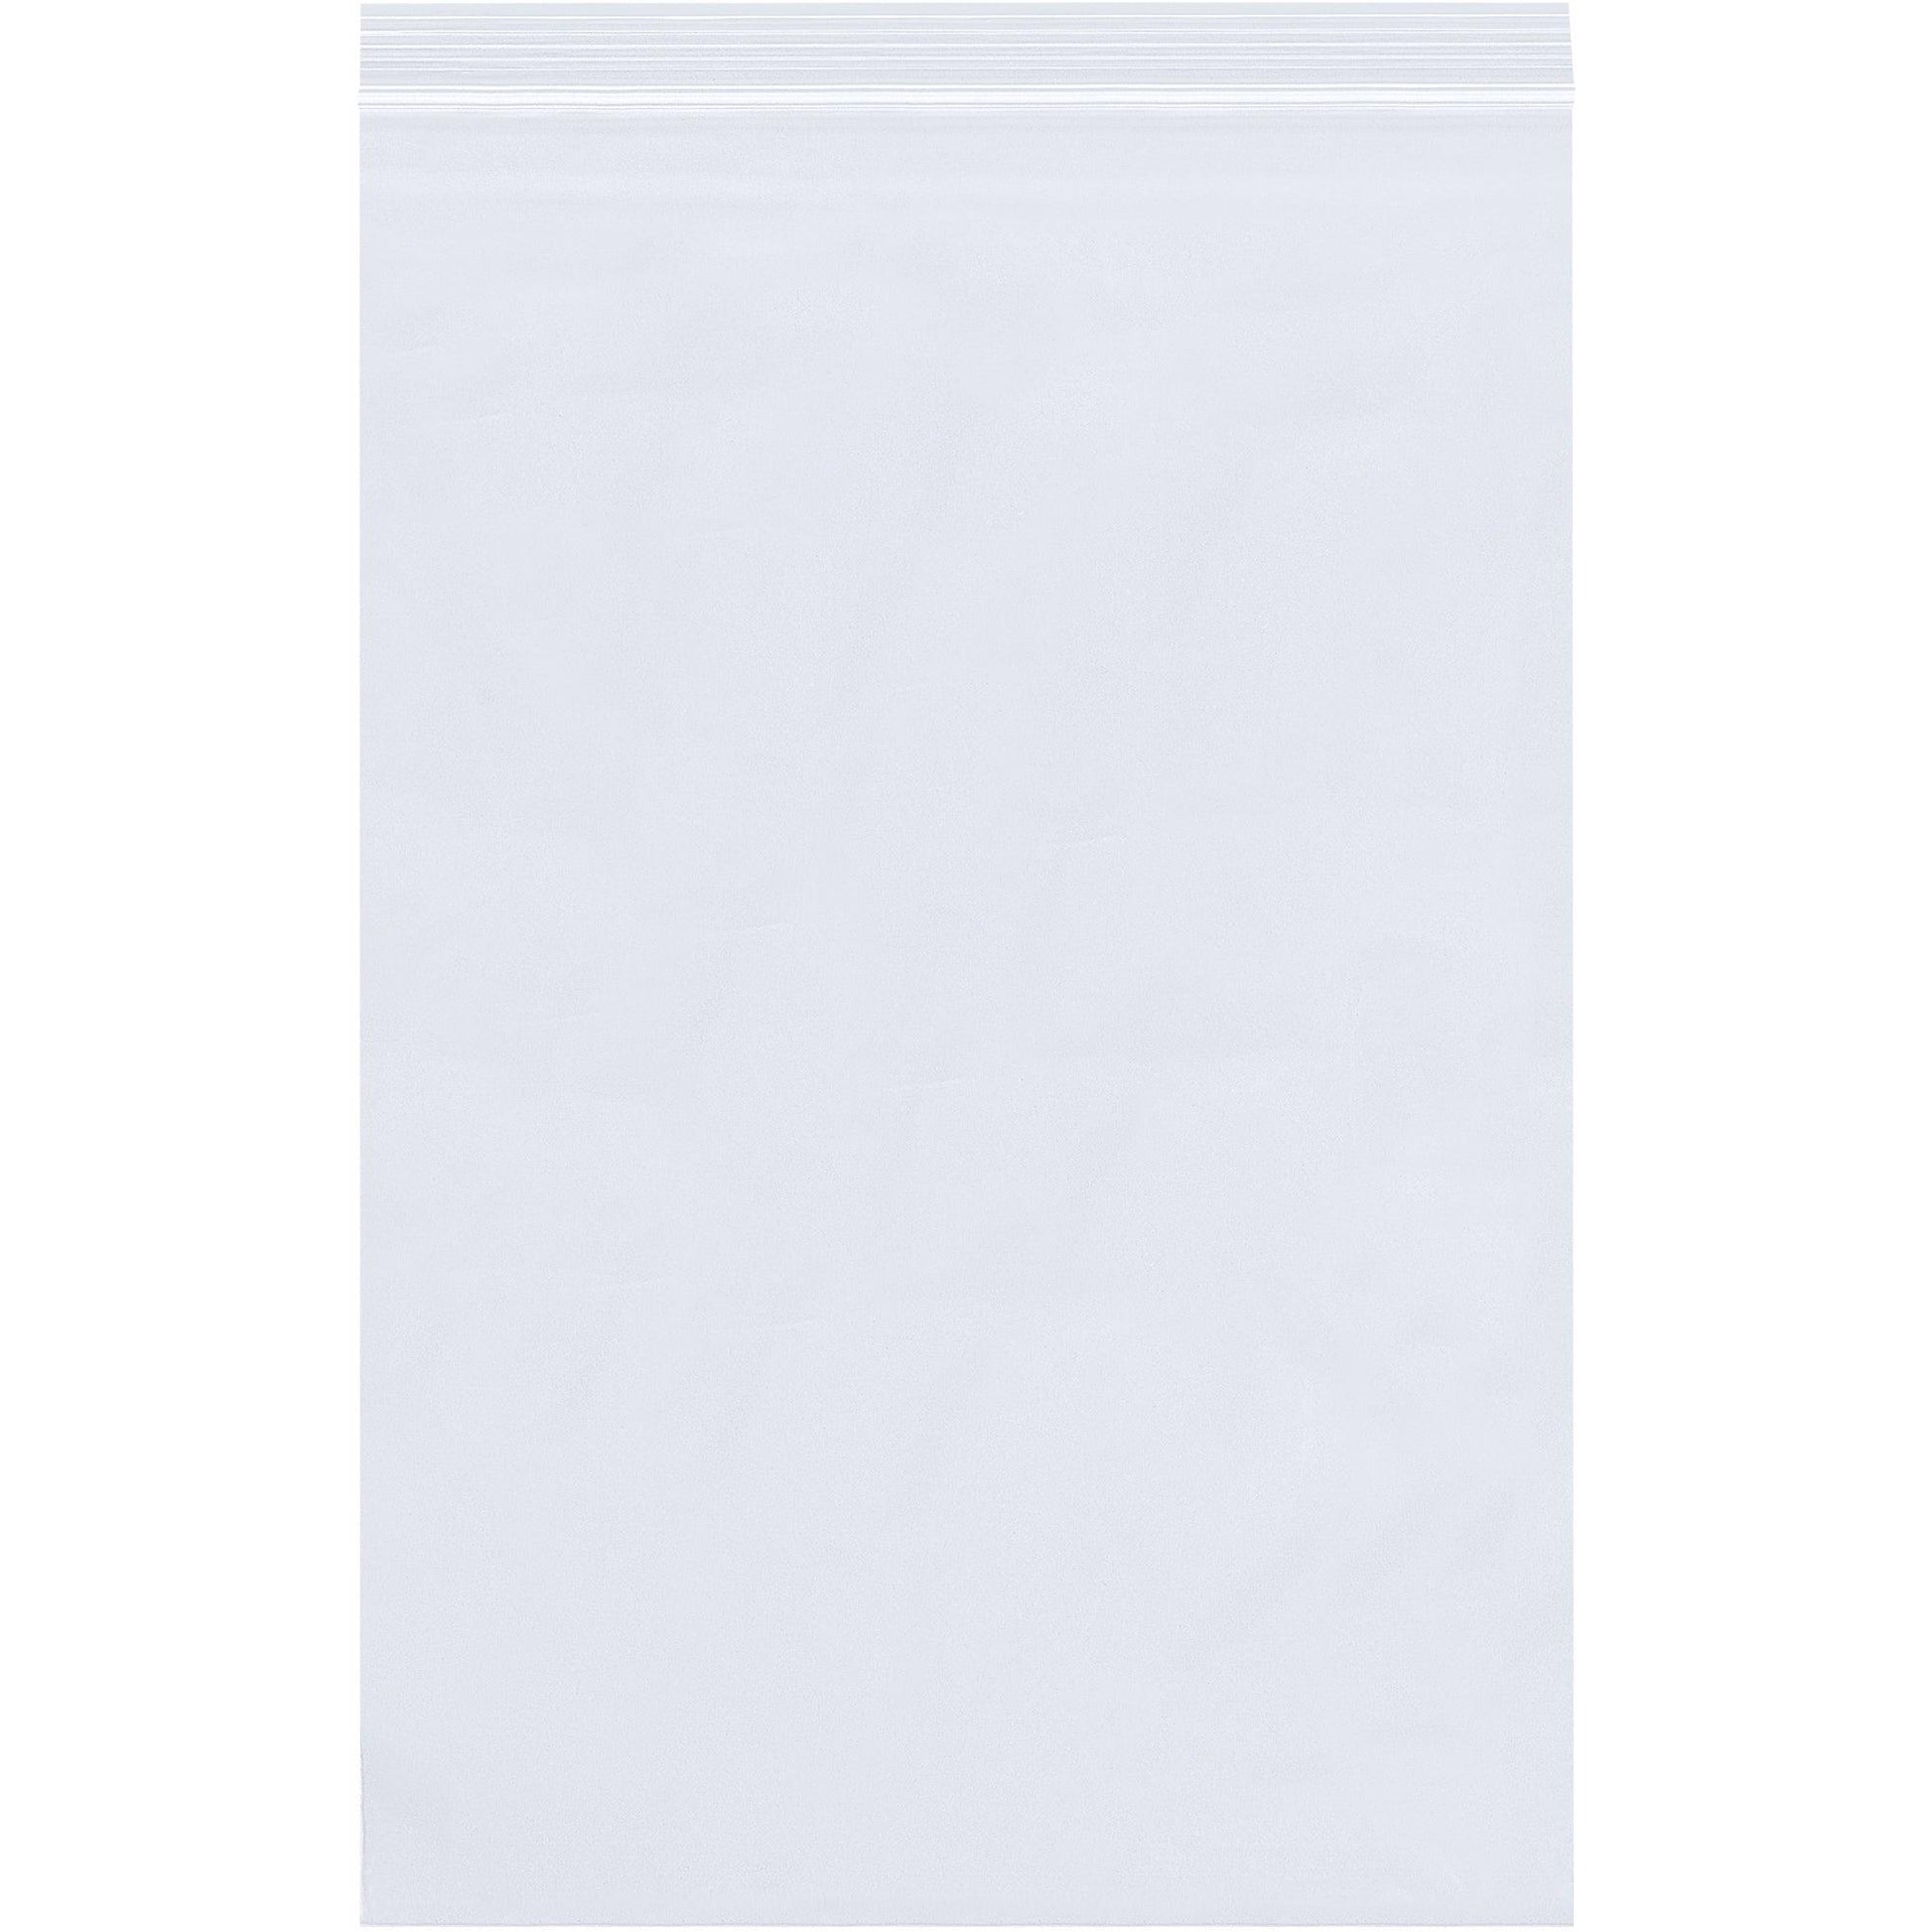 16 x 20" - 4 Mil Reclosable Poly Bags - PB3823